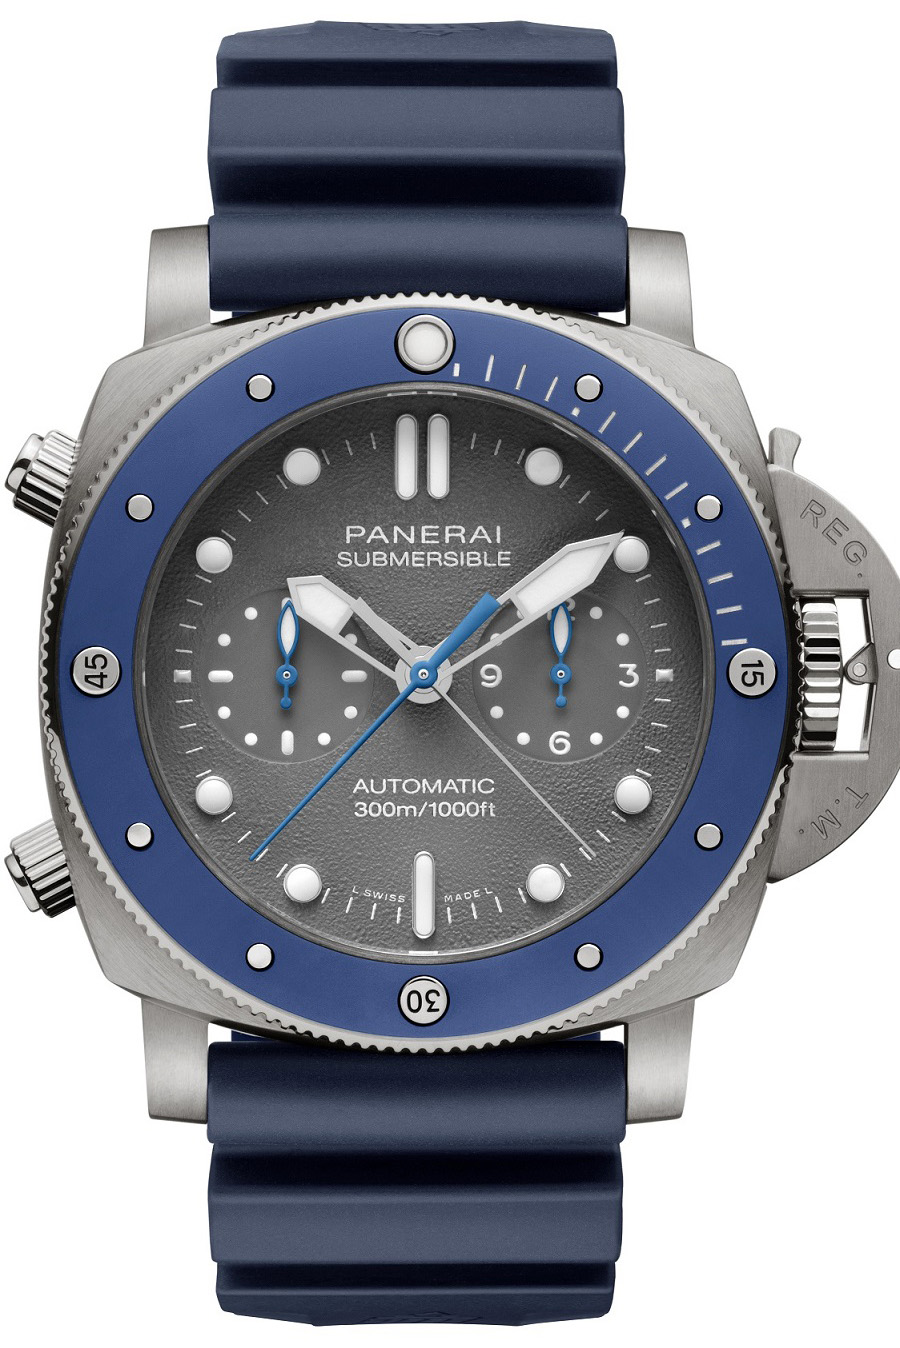 Panerai Submersible Chrono Guillaume Néry, panerai, panerai watch, panerai watch price, Guillaume Néry, underwater watch